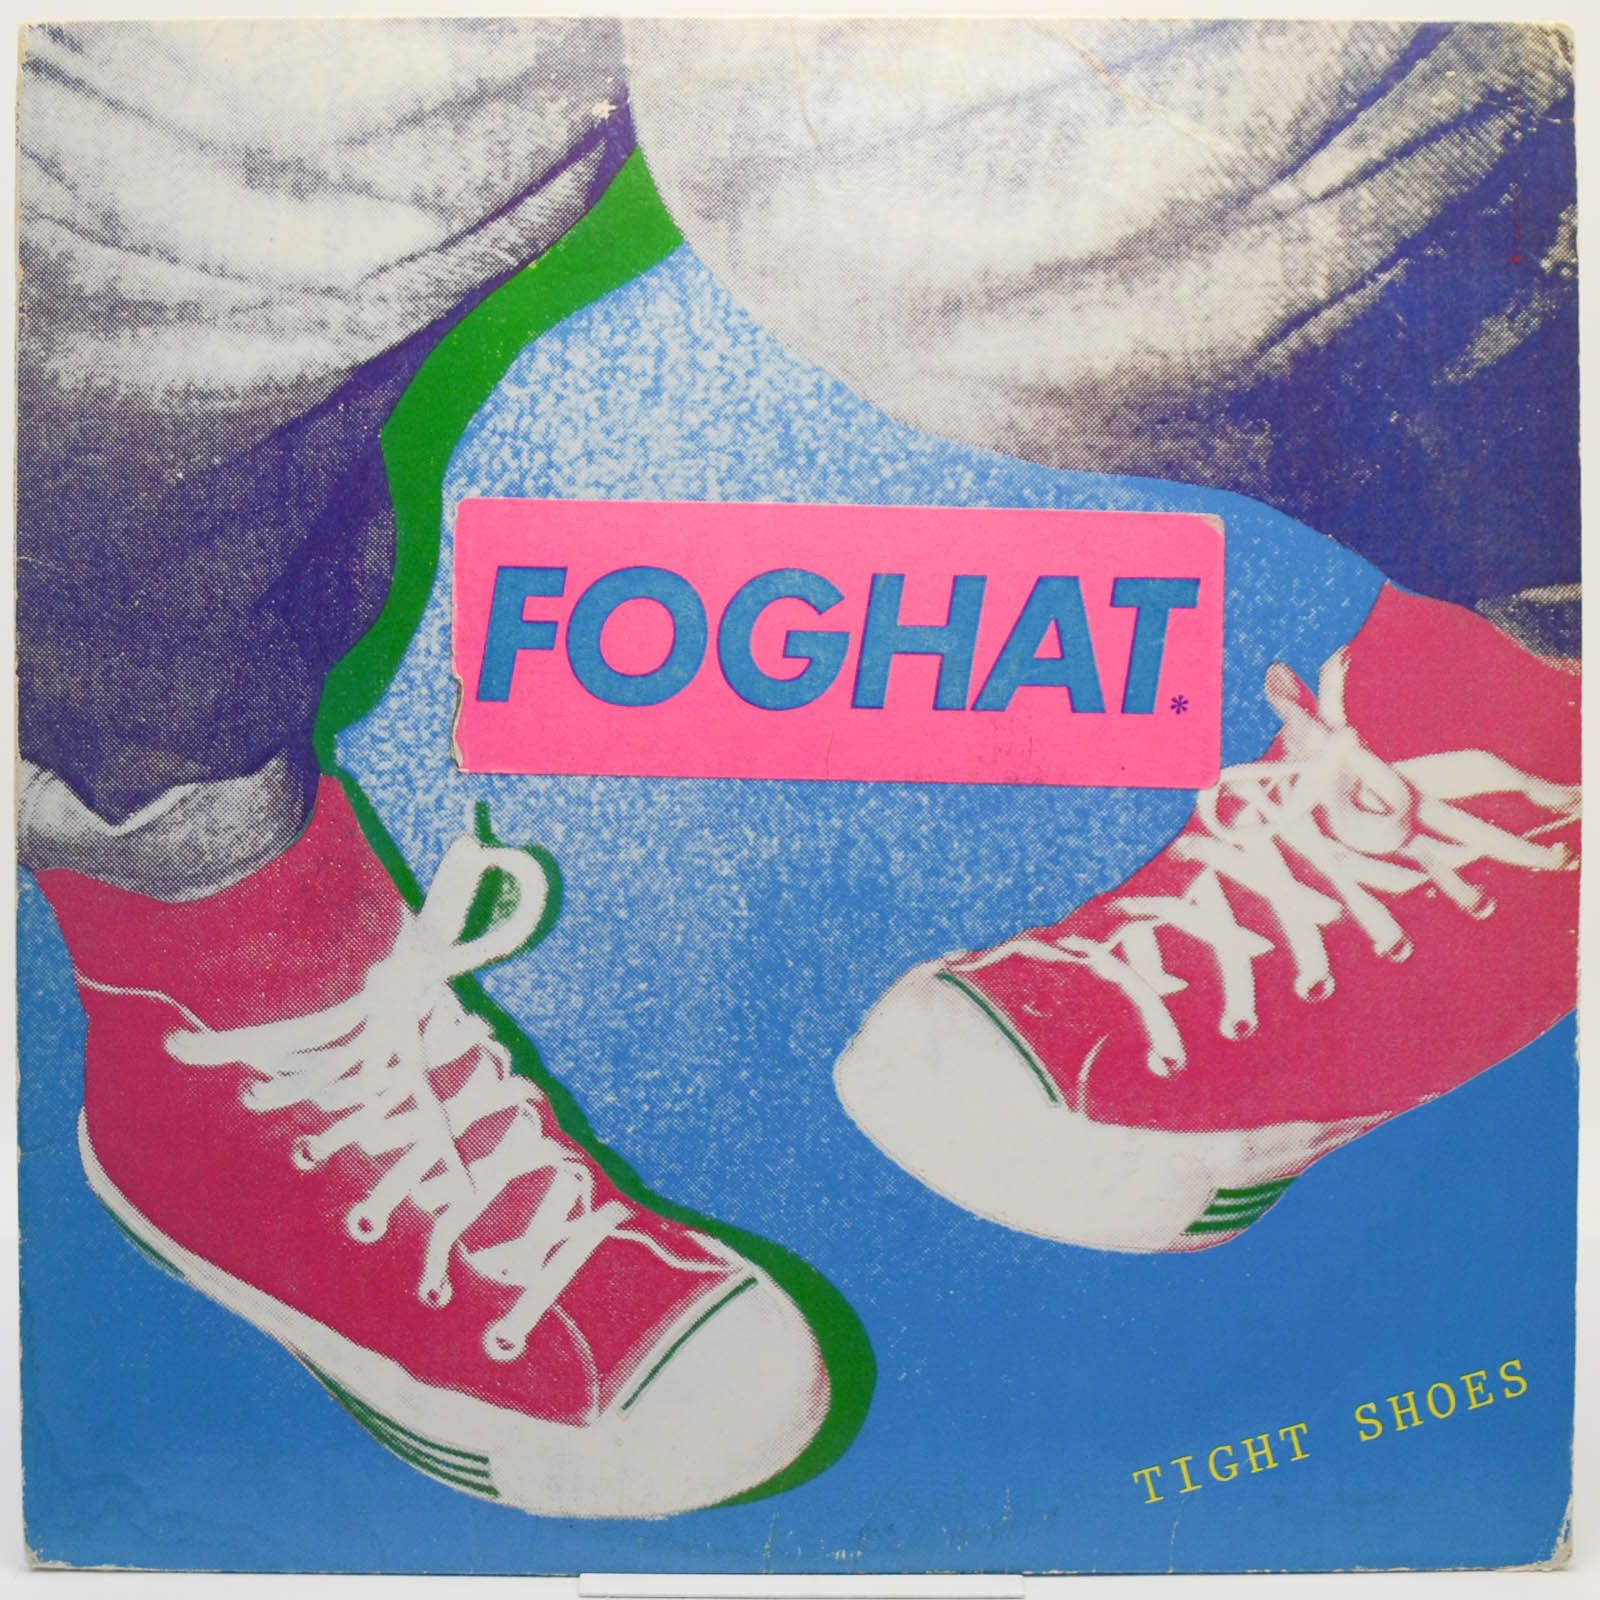 Foghat — Tight Shoes (USA), 1980